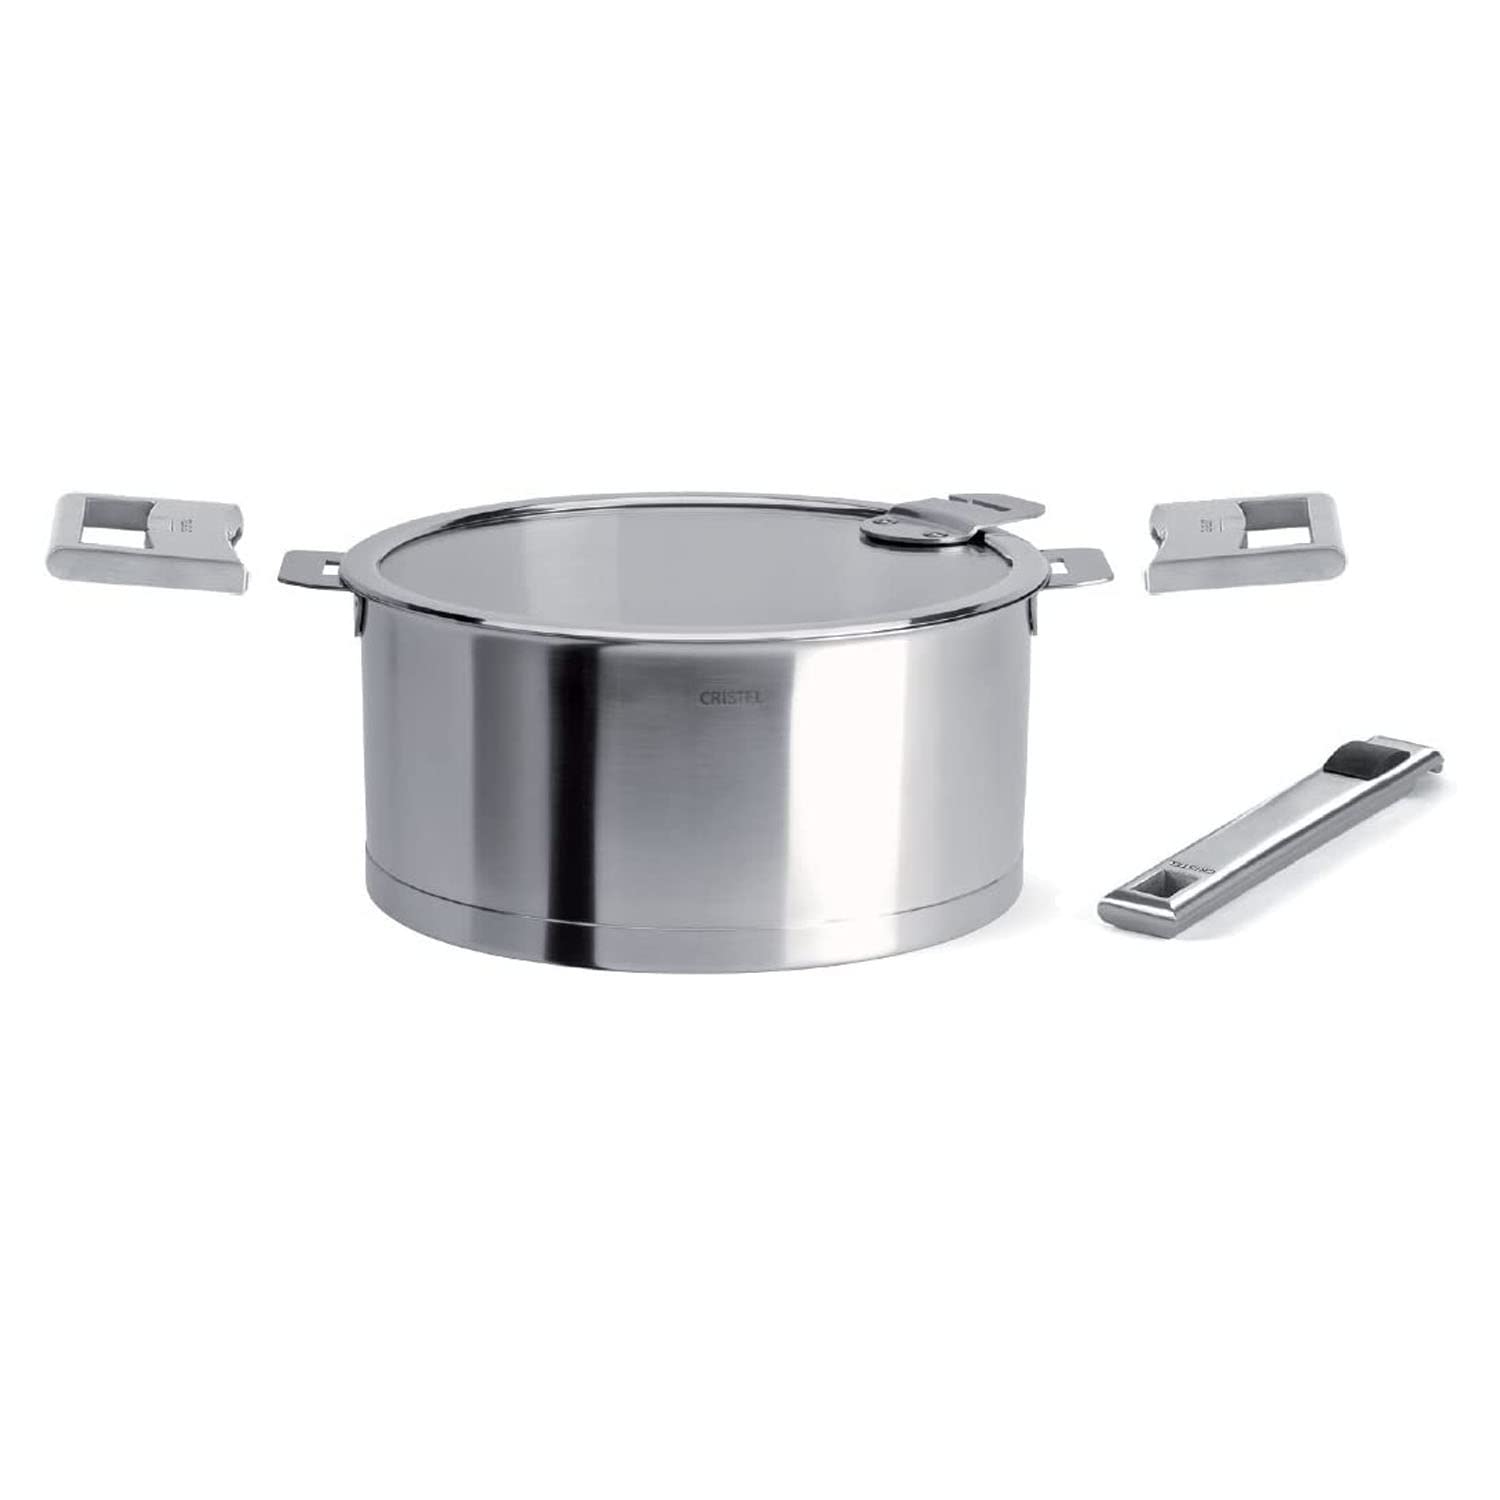 Cristel C14QLKSAPA Strate Set with 1 qt Saucepan with Lid, long handle and 2 grips (5 Piece), Silver